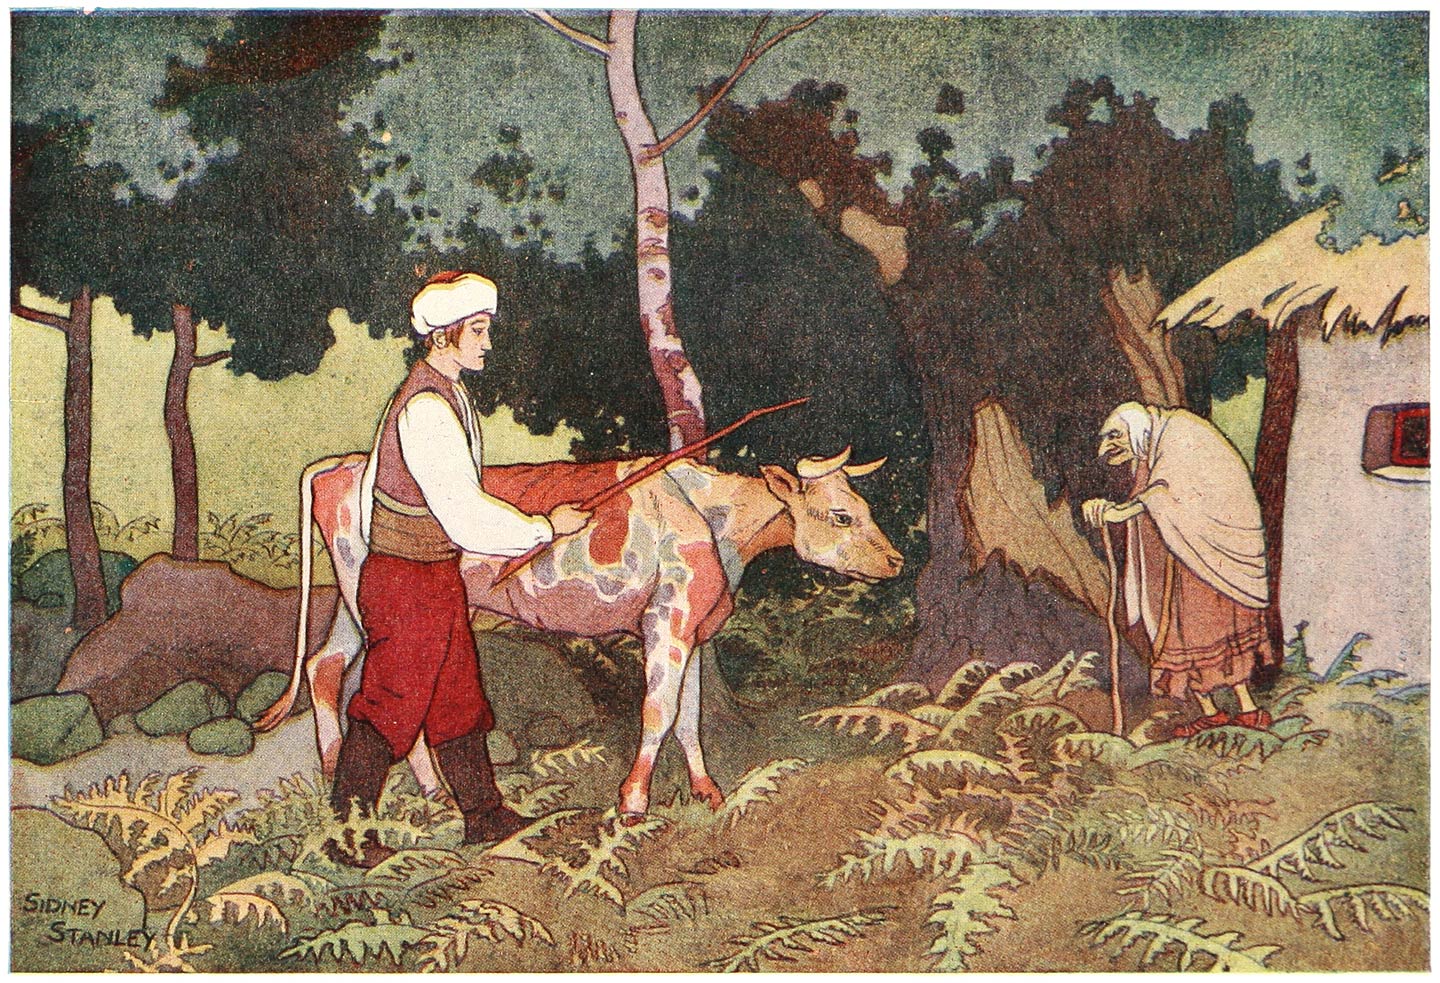 “He drove the cow to the hut where he had passed the night.”